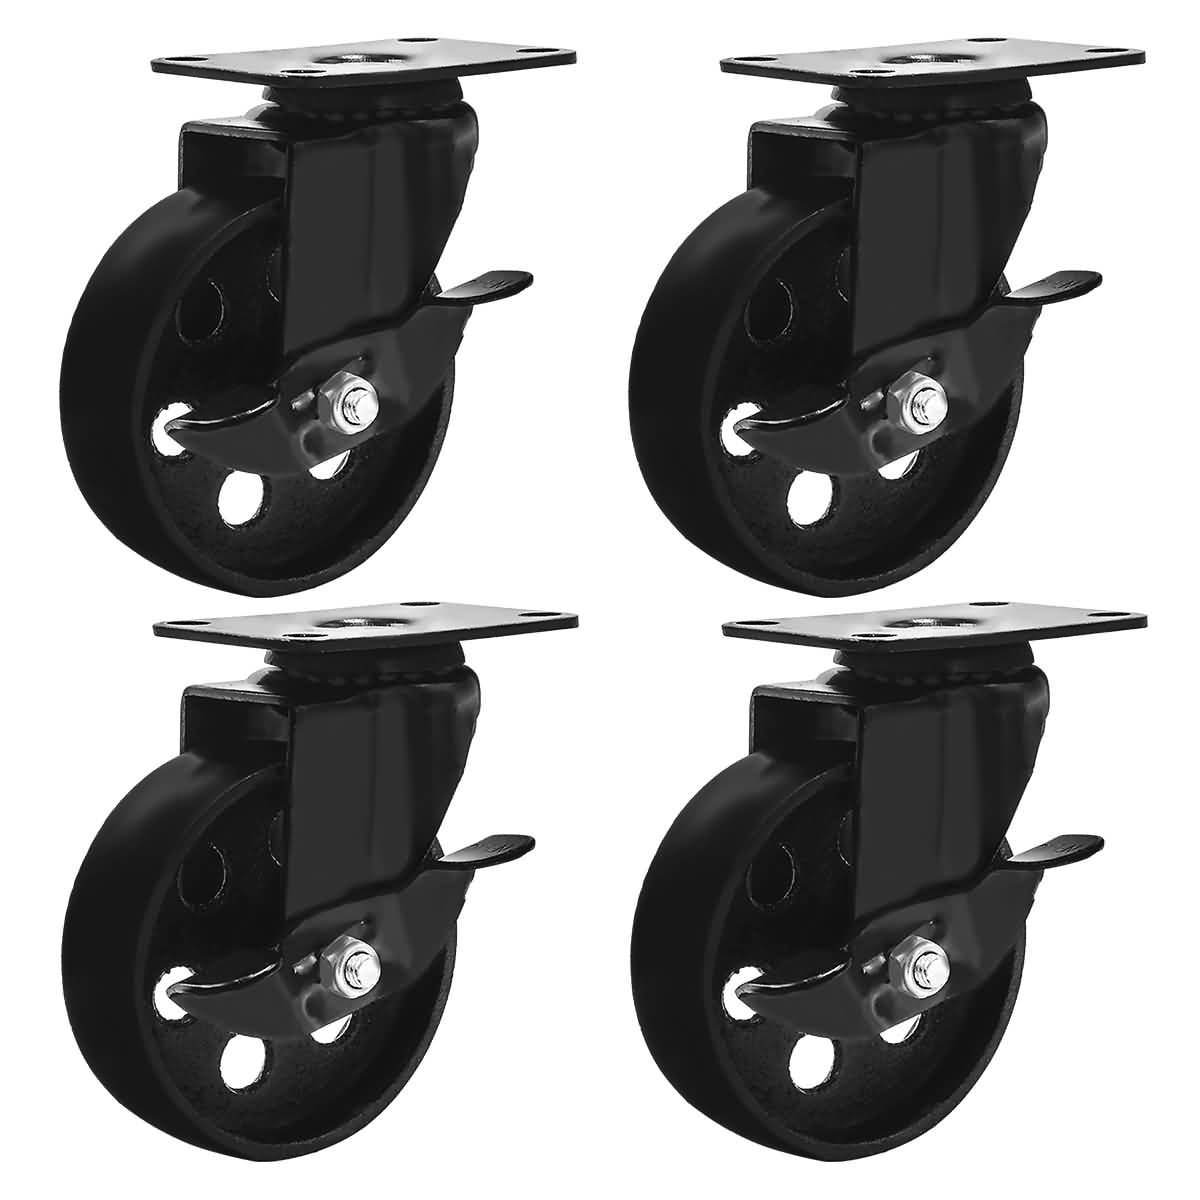 Rotate with Swivel Plate for Trucks with Brake and without brake all measures 